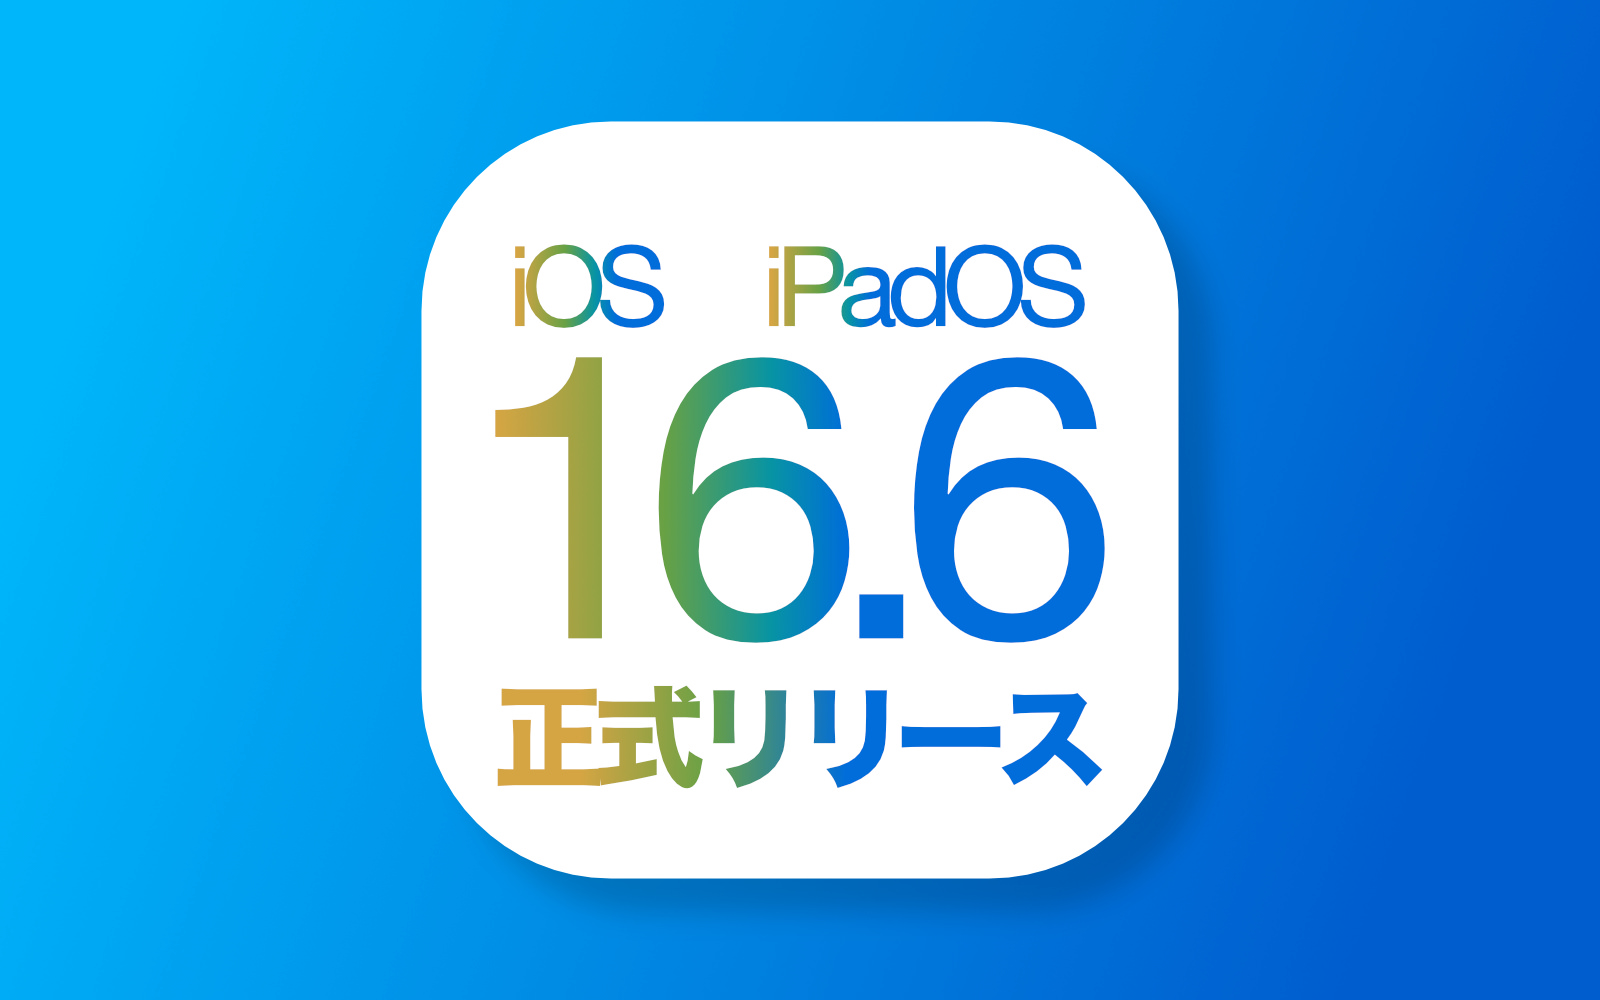 IOS16 6 official release